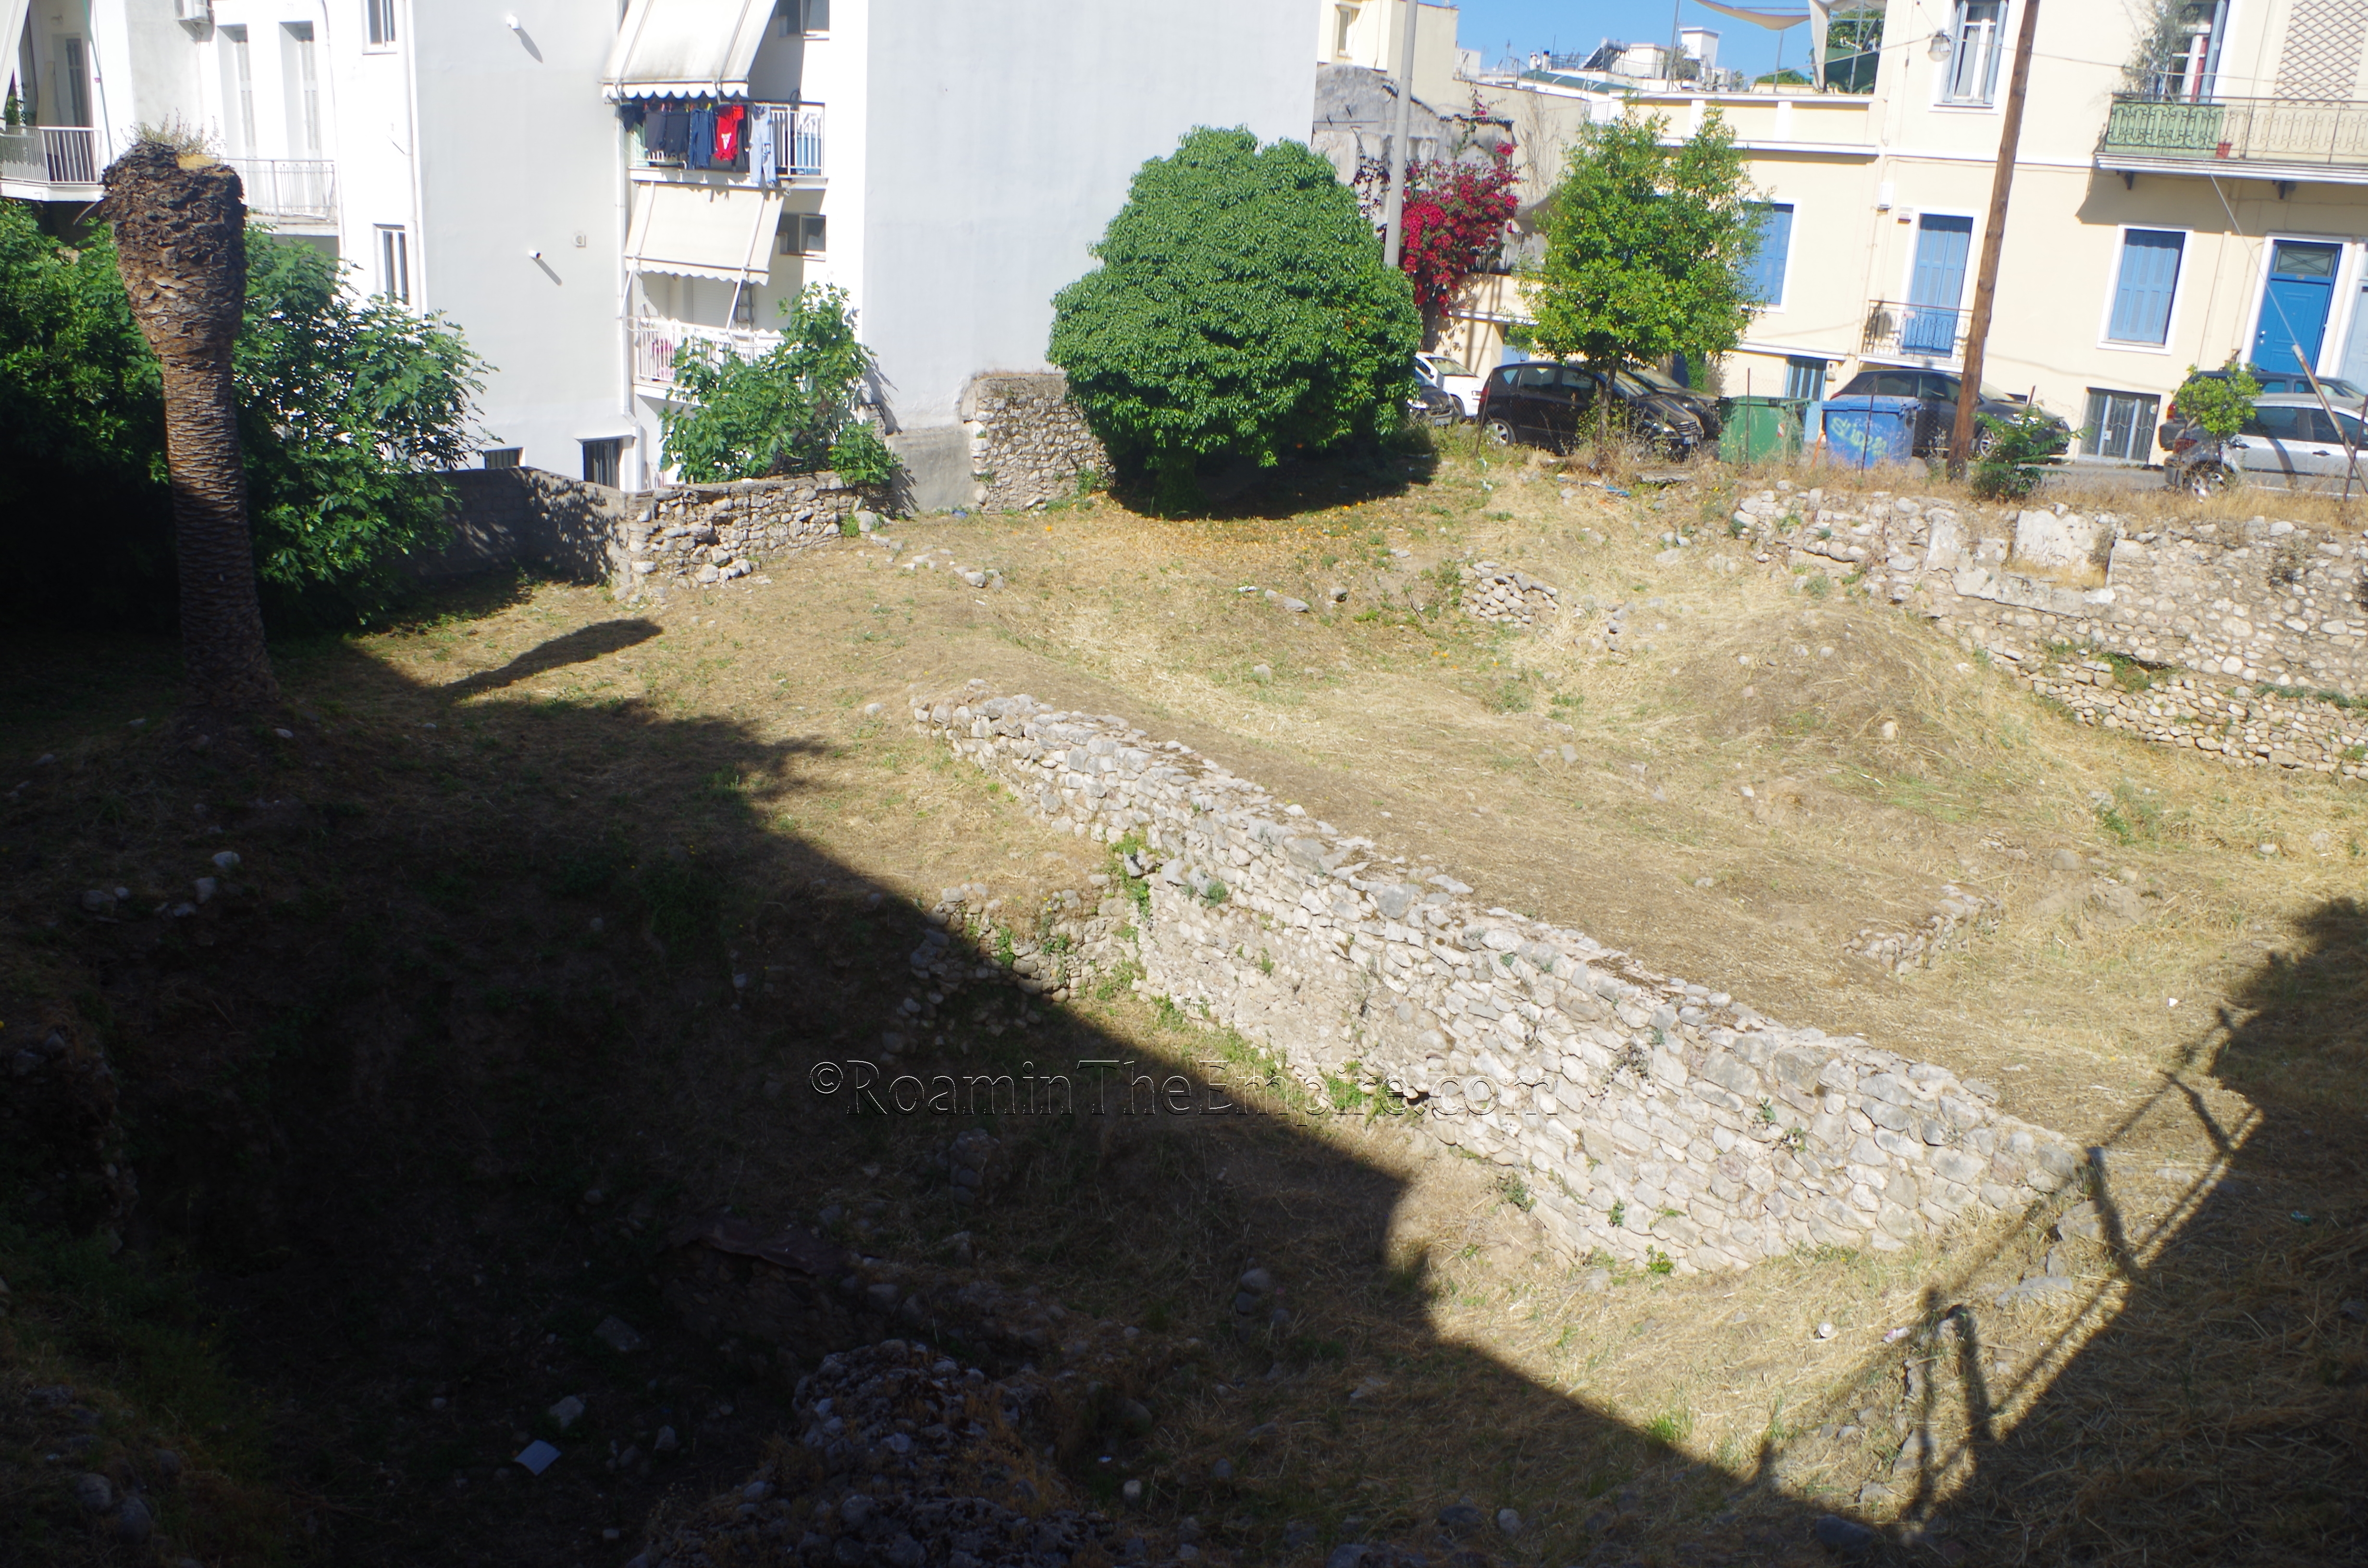 Excavated area adjacent to the odeon.